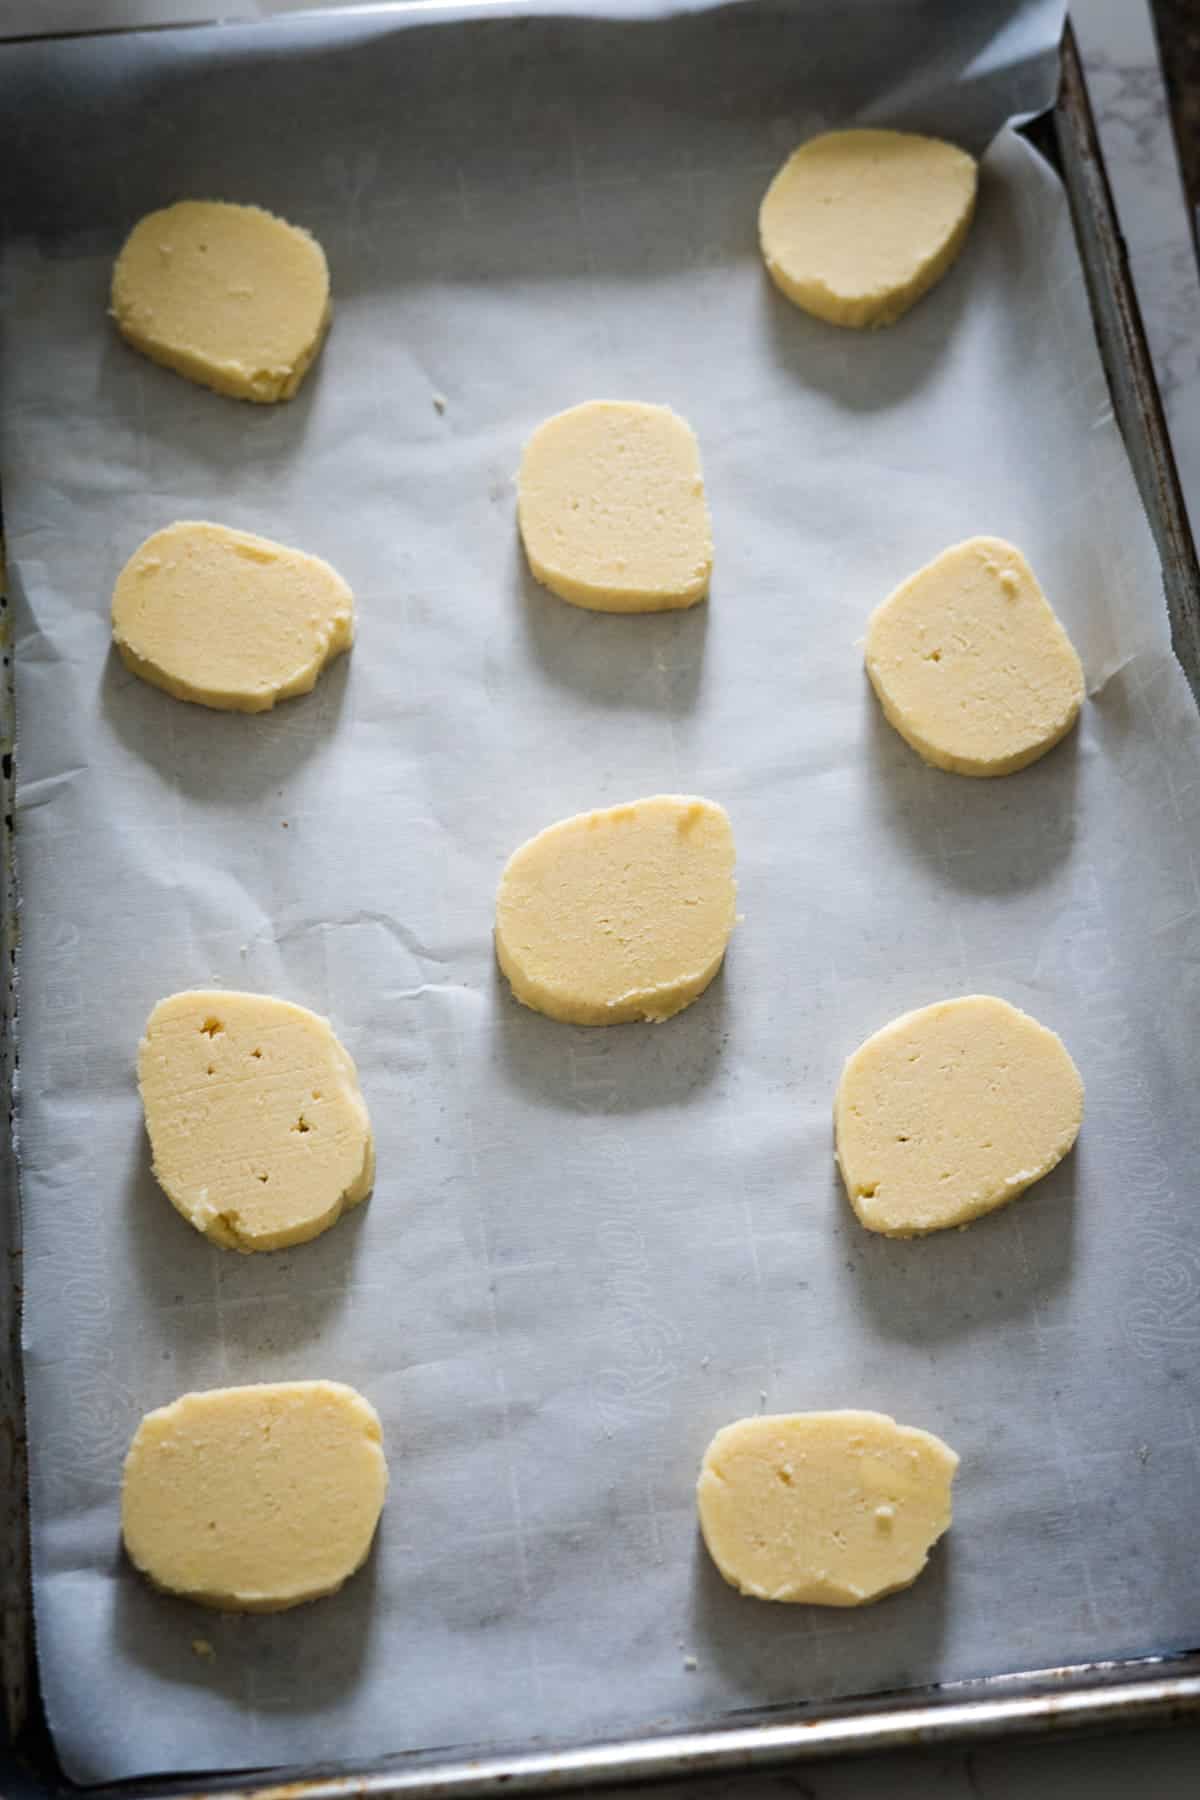 Keto cream cheese cookie dough portions arranged on a parchment-lined baking sheet, ready for baking.